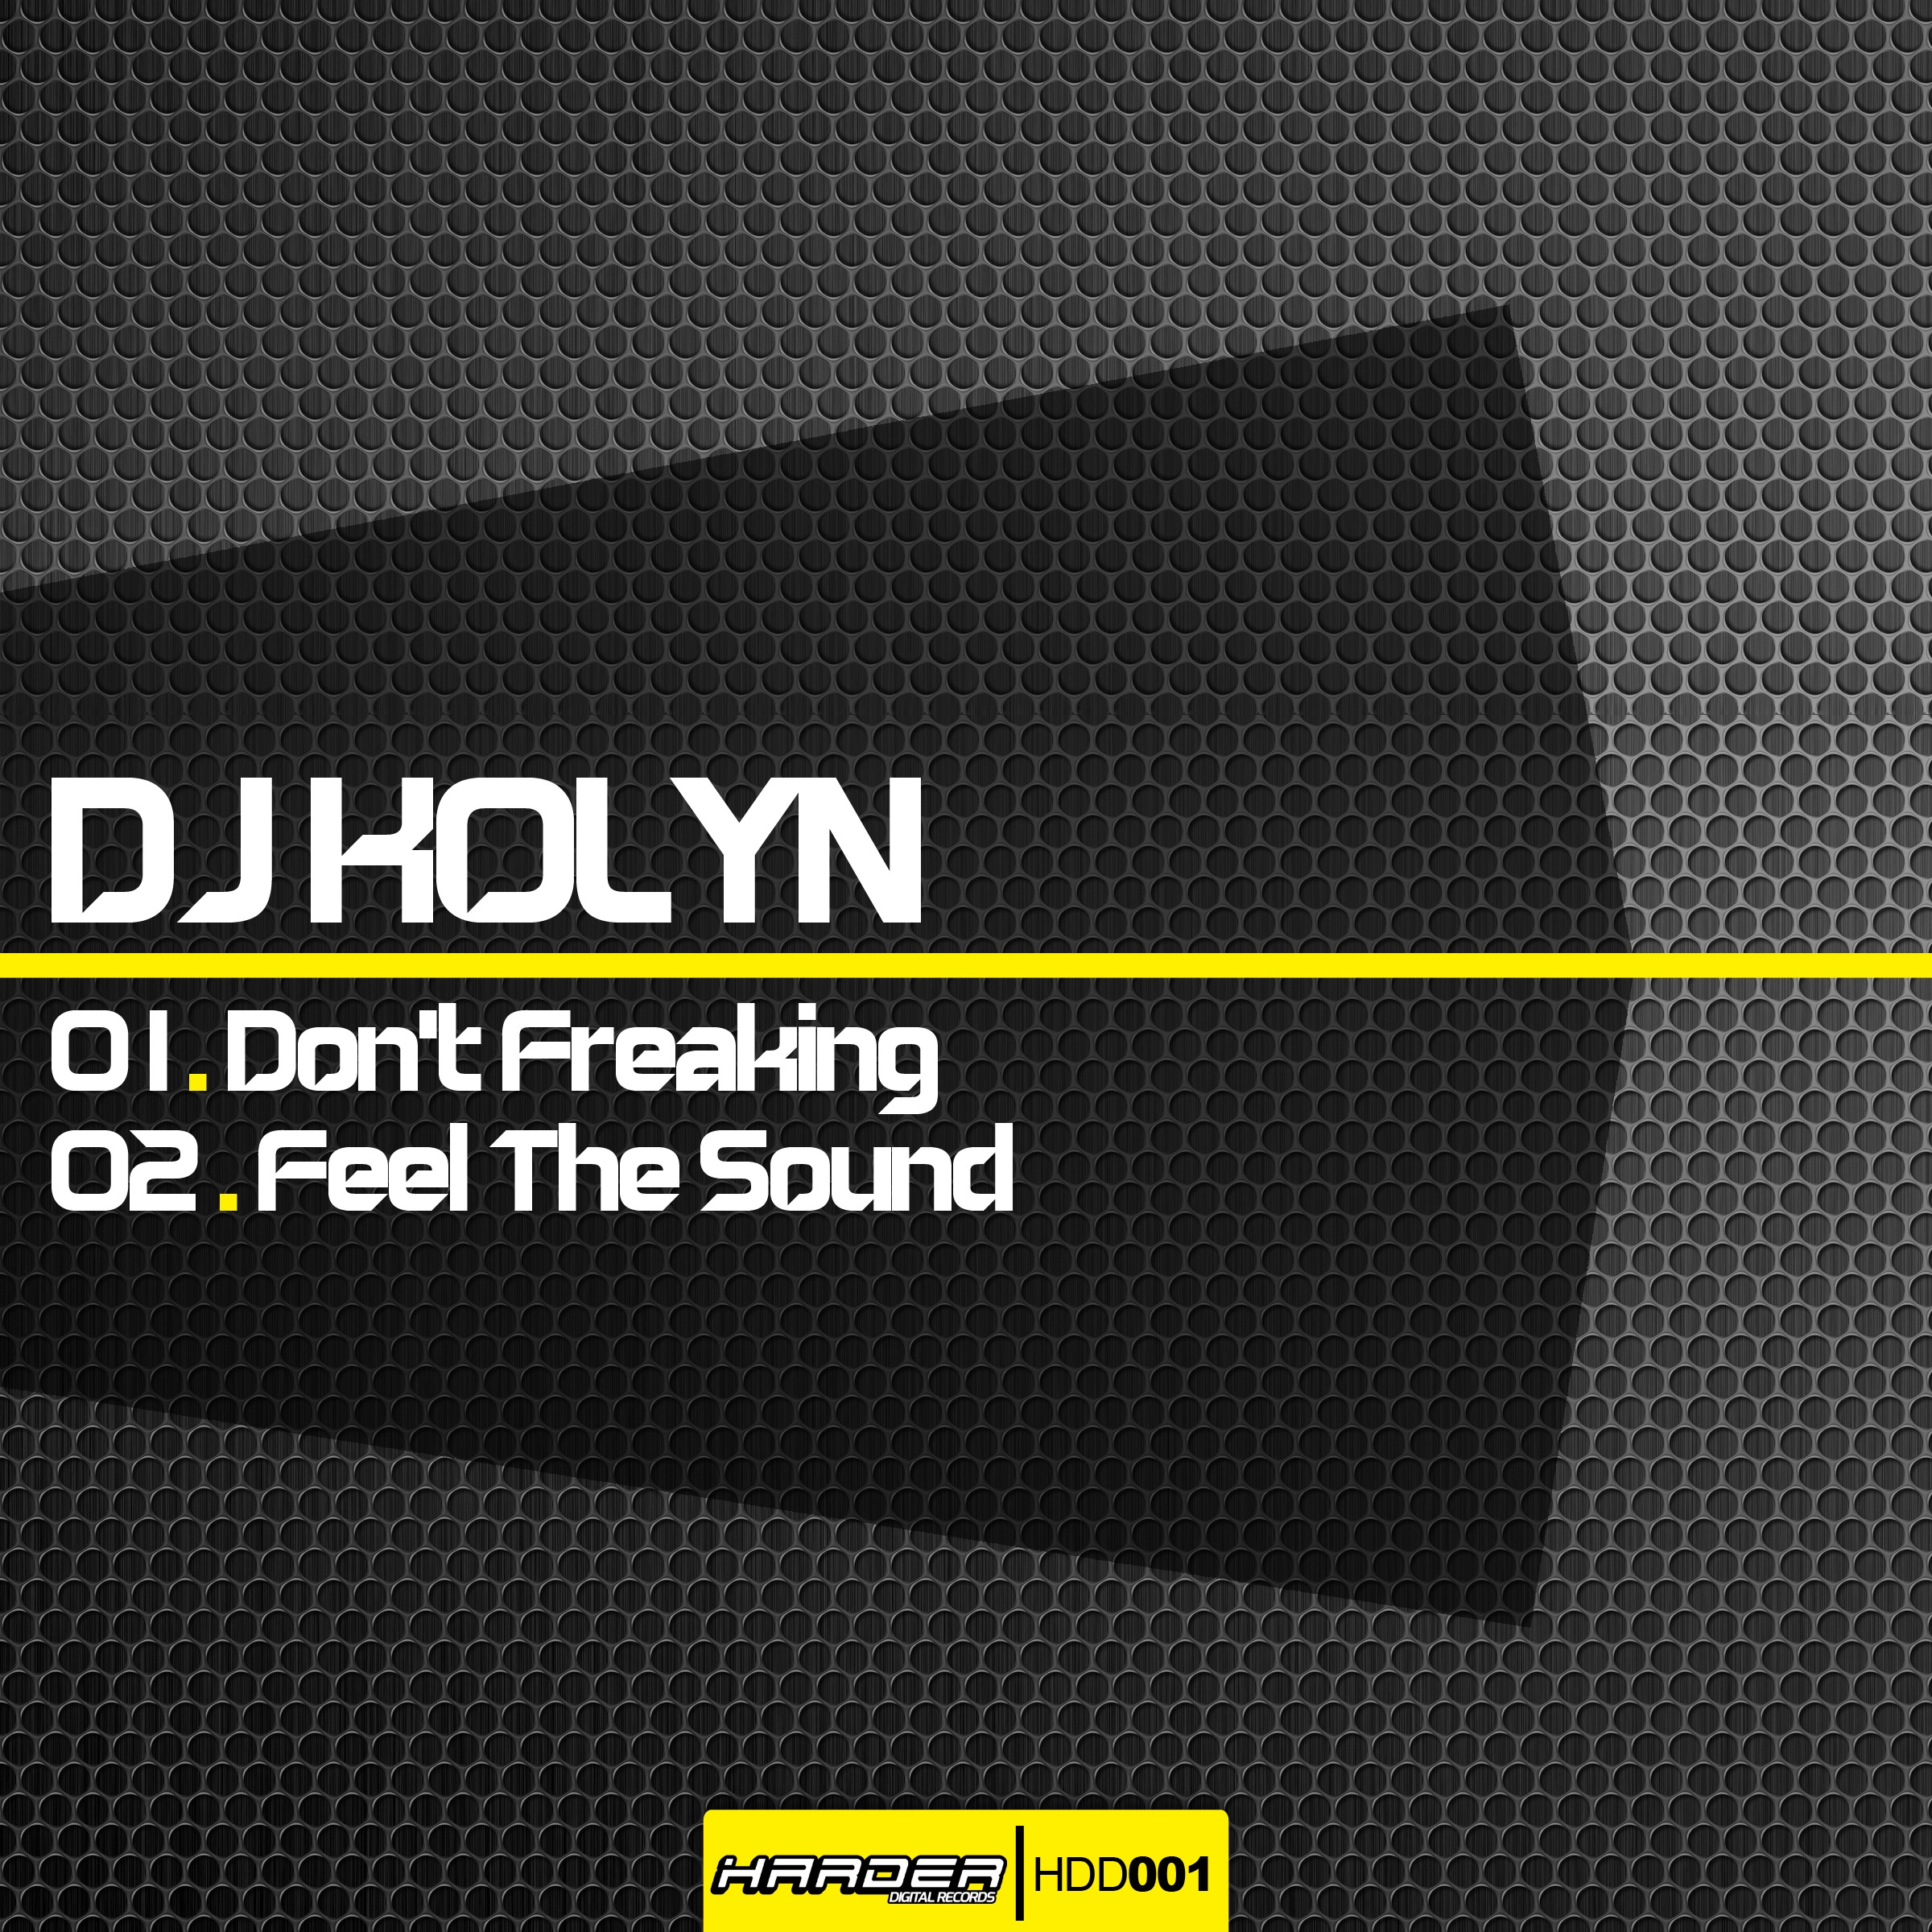 Don't Freaking / Feel the Sound